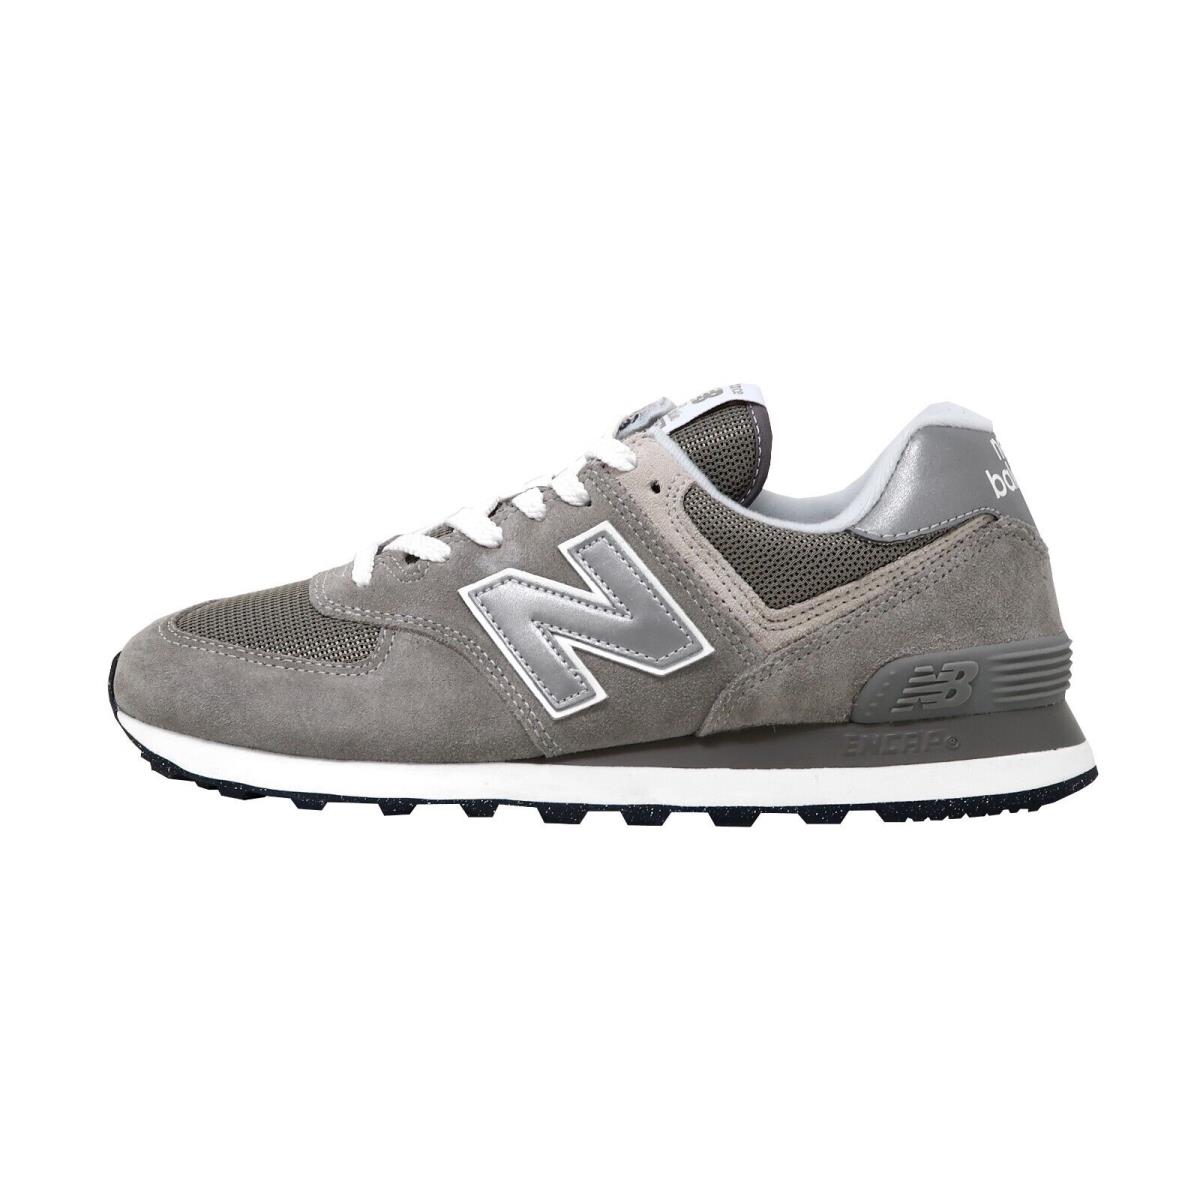 New Balance Men`s 574 Core Classic Shoes Sneakers ML574EVG - Grey/white - Gray